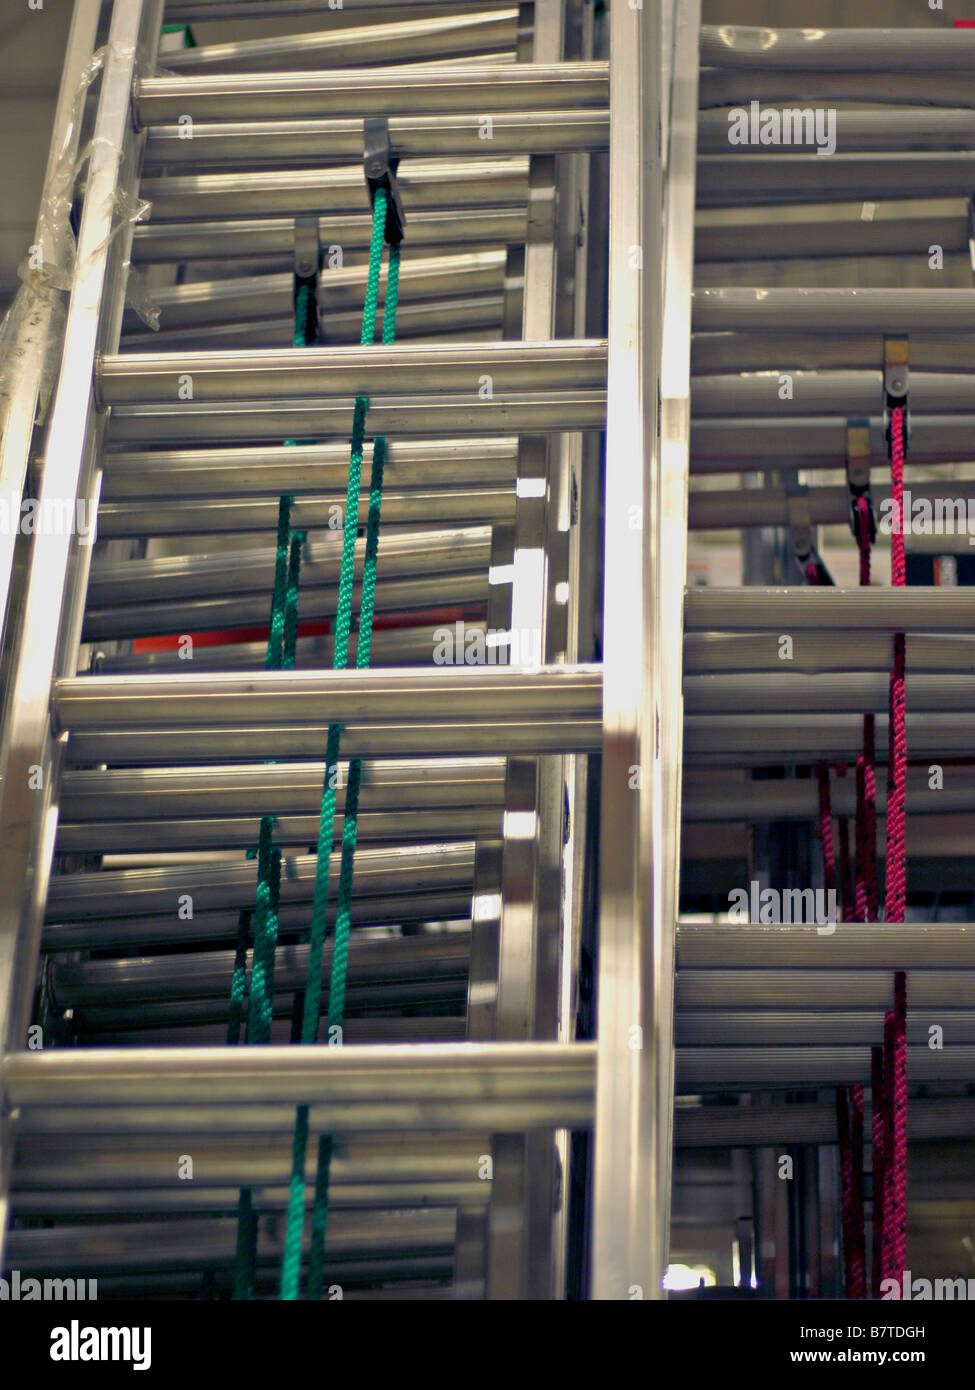 Aluminum ladders on display for sale at an industrial supply warehouse. Stock Photo